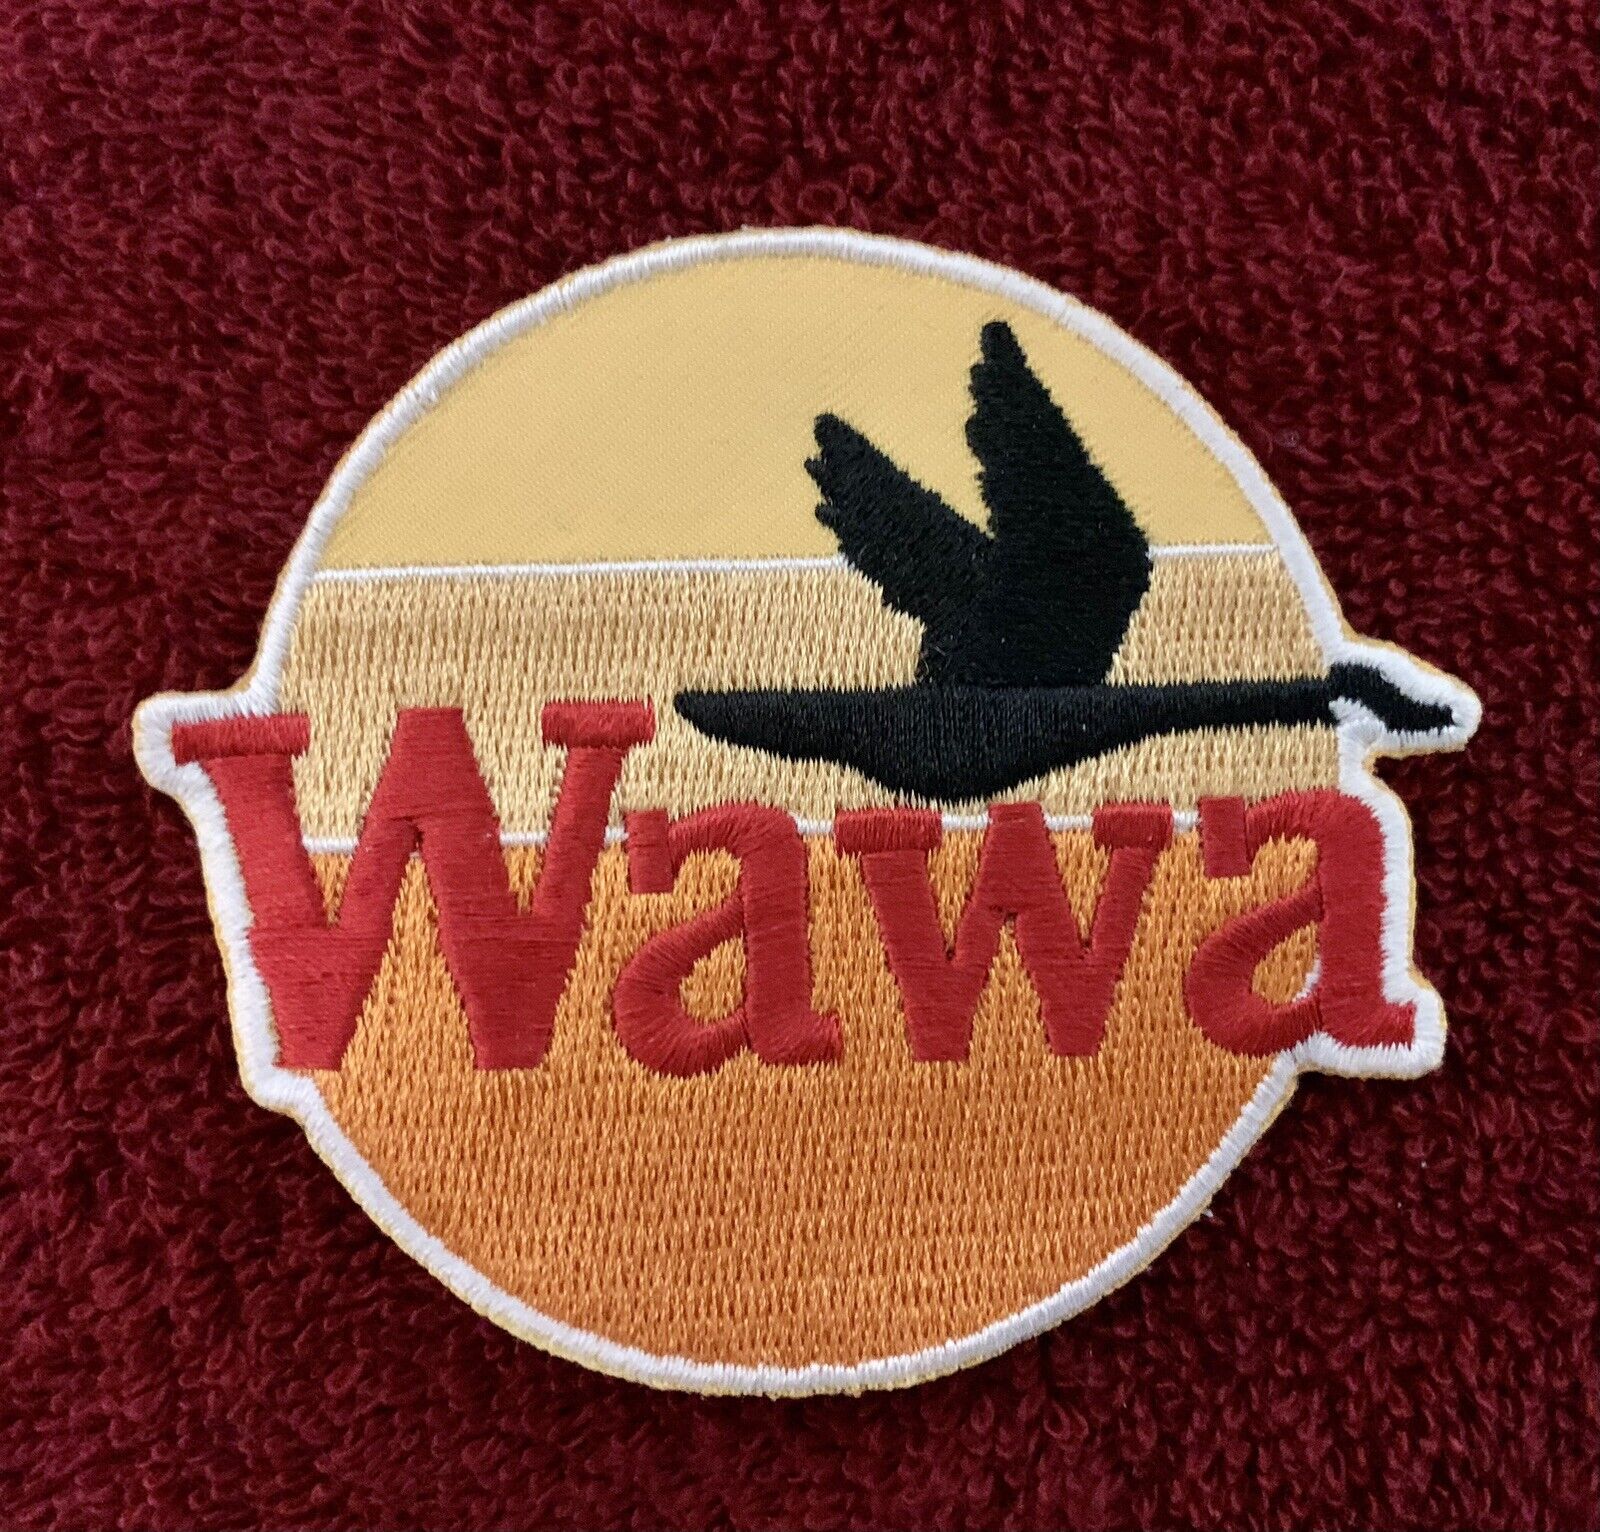 WAWA Classic 80’s Era Logo SEW-ON EMBROIDERED PATCH 3x3.5 Inches HIGH QUALITY 🤘